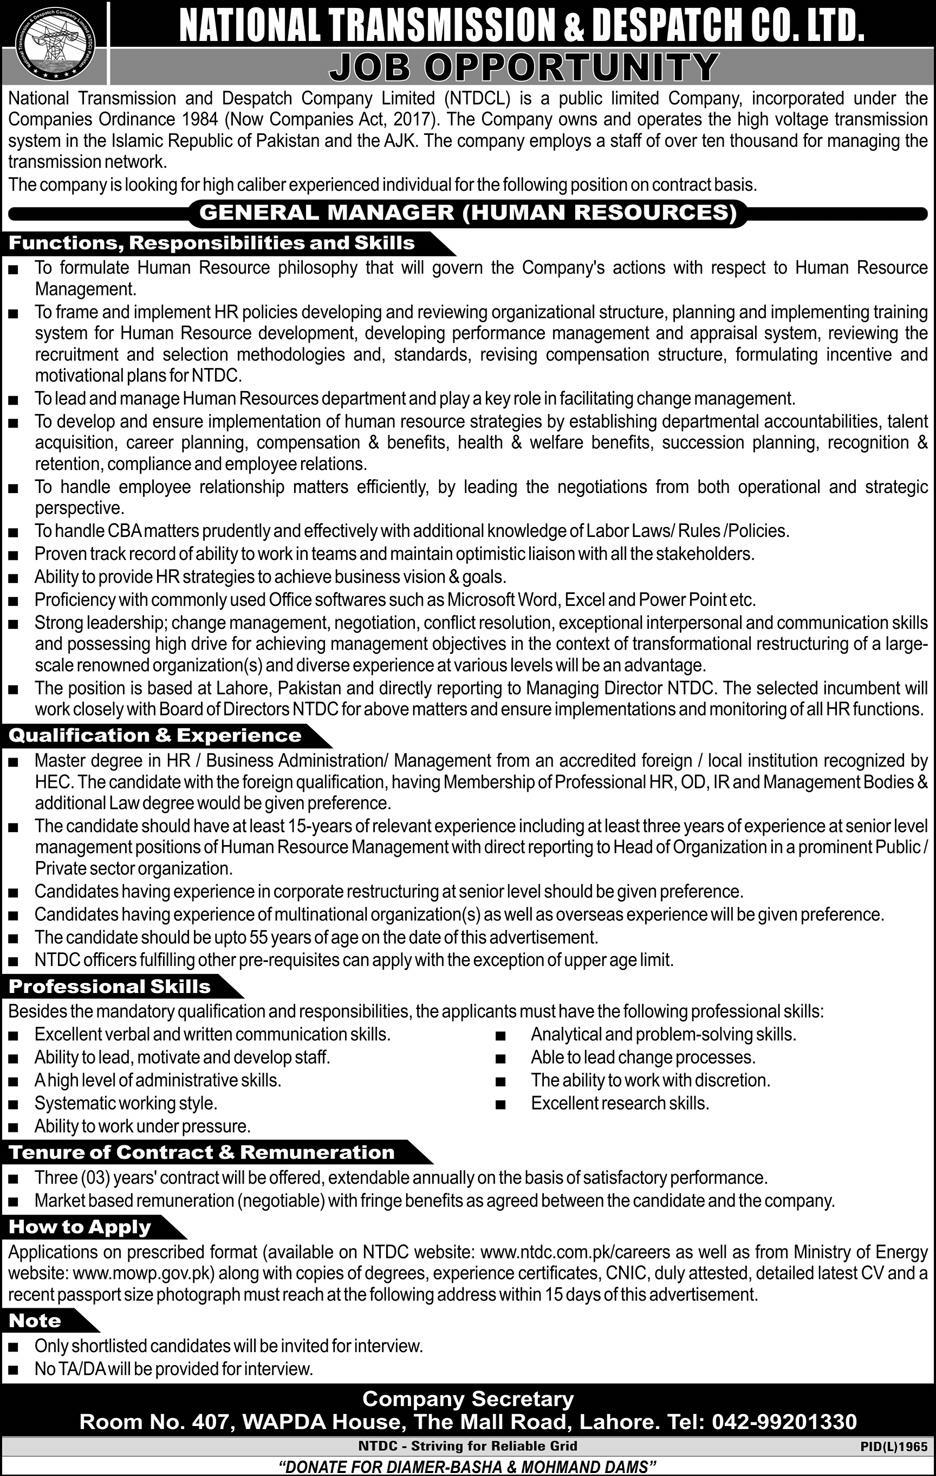 National Transmission And Despatch Company jobs